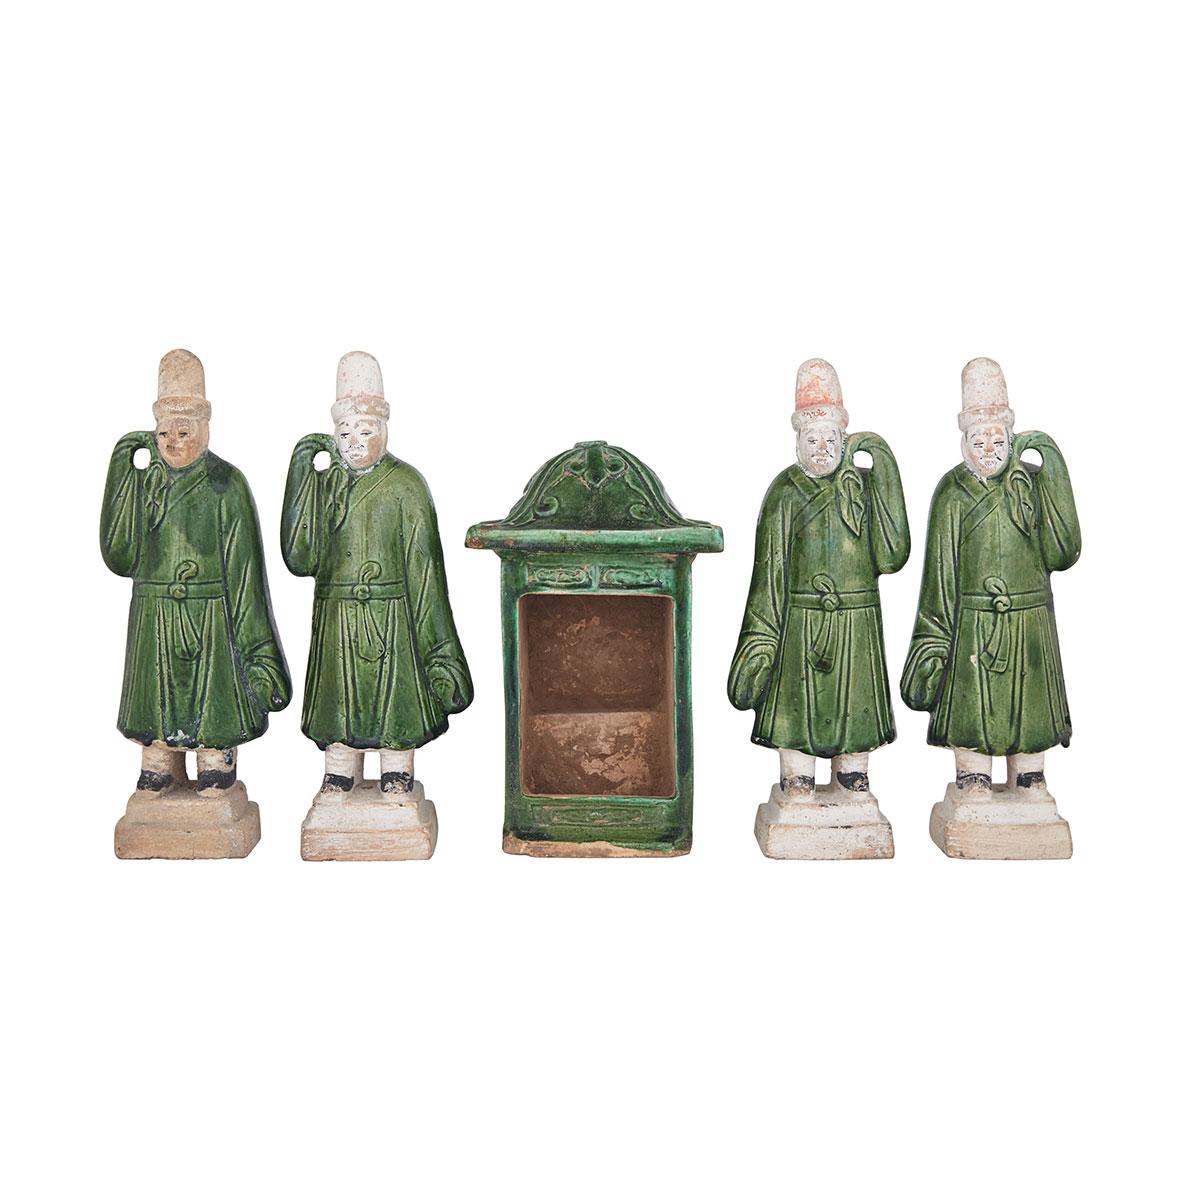 Group of Four Sancai Glazed Attendants and Palaquin, Ming Dynasty